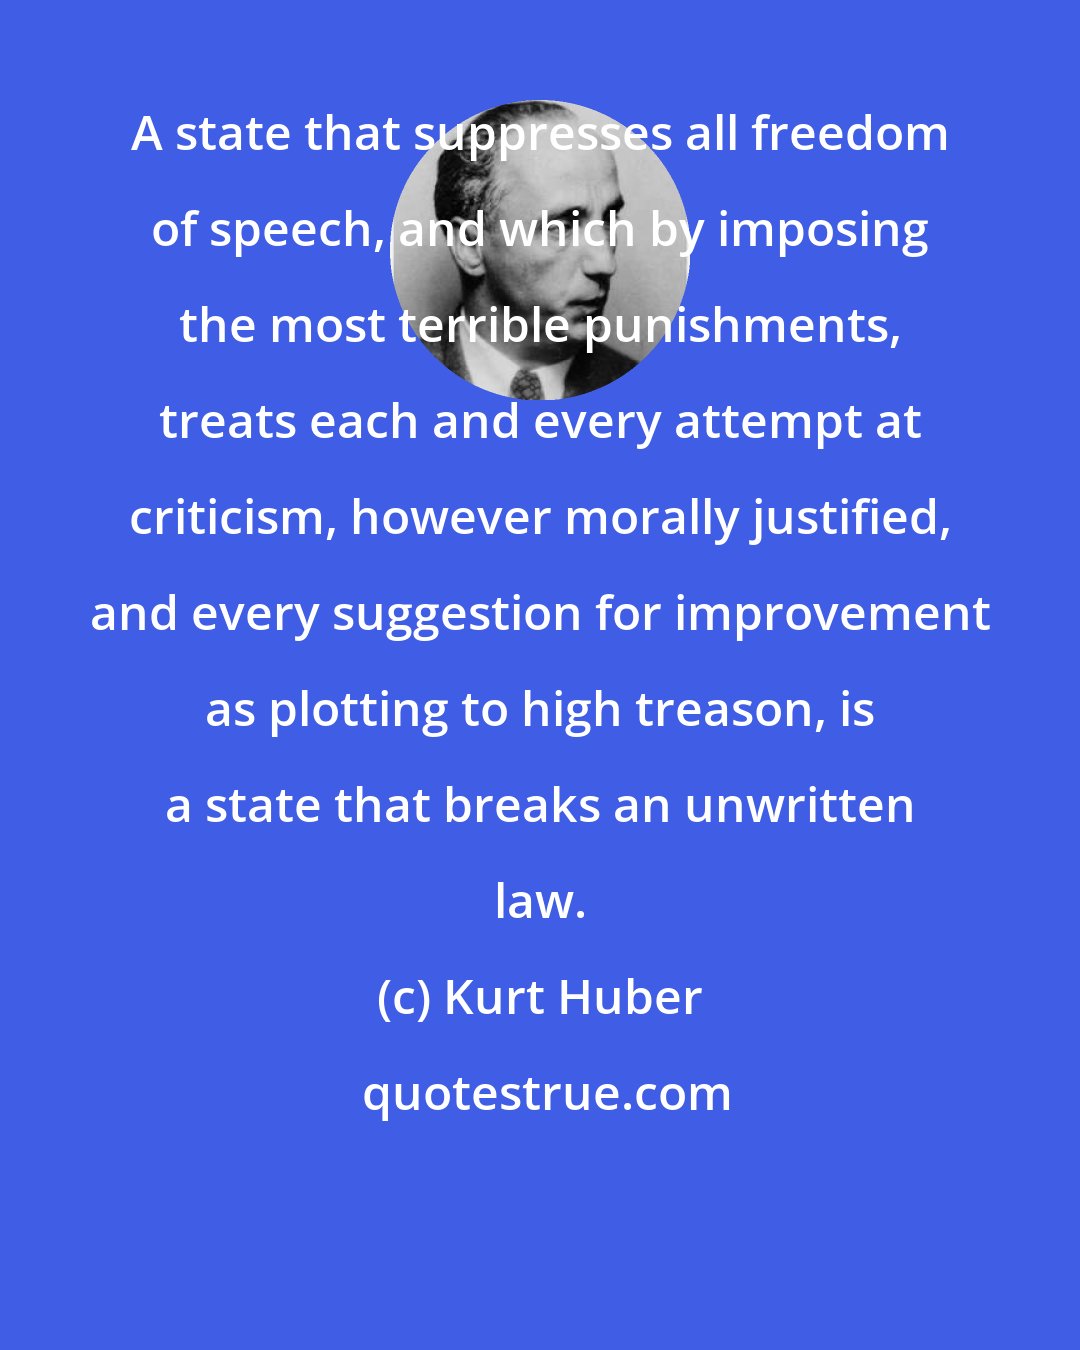 Kurt Huber: A state that suppresses all freedom of speech, and which by imposing the most terrible punishments, treats each and every attempt at criticism, however morally justified, and every suggestion for improvement as plotting to high treason, is a state that breaks an unwritten law.